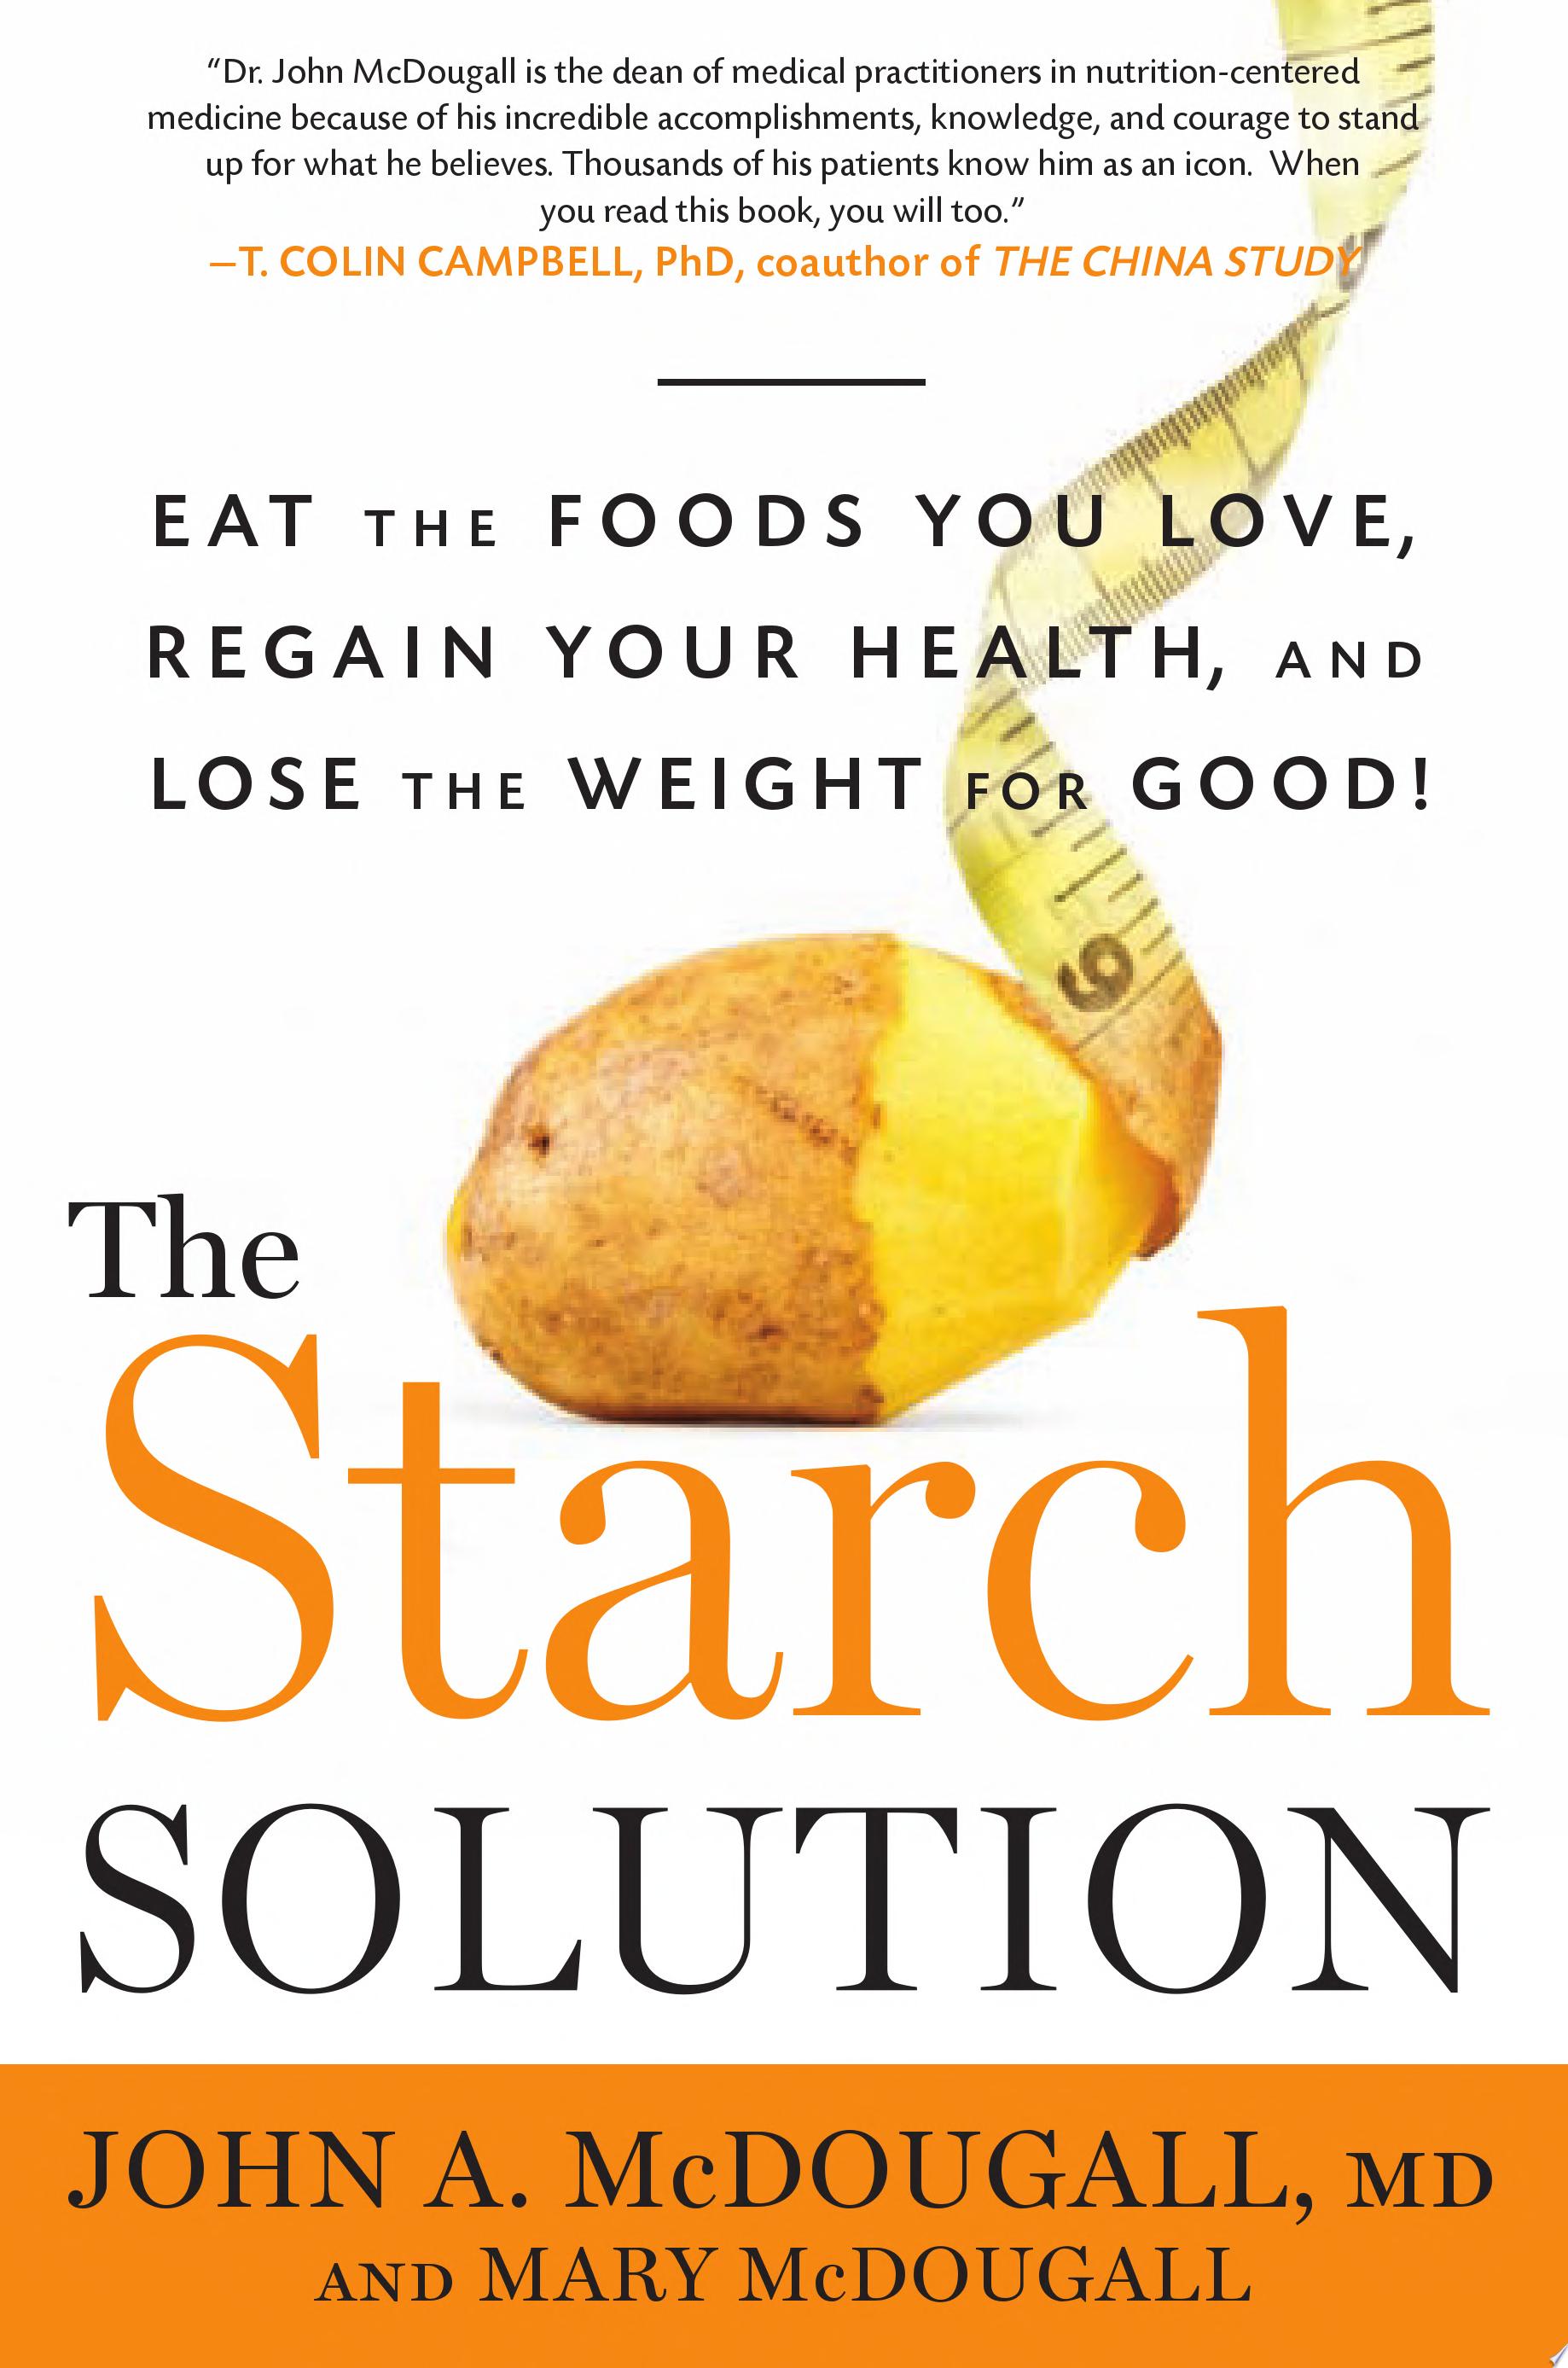 Image for "The Starch Solution"